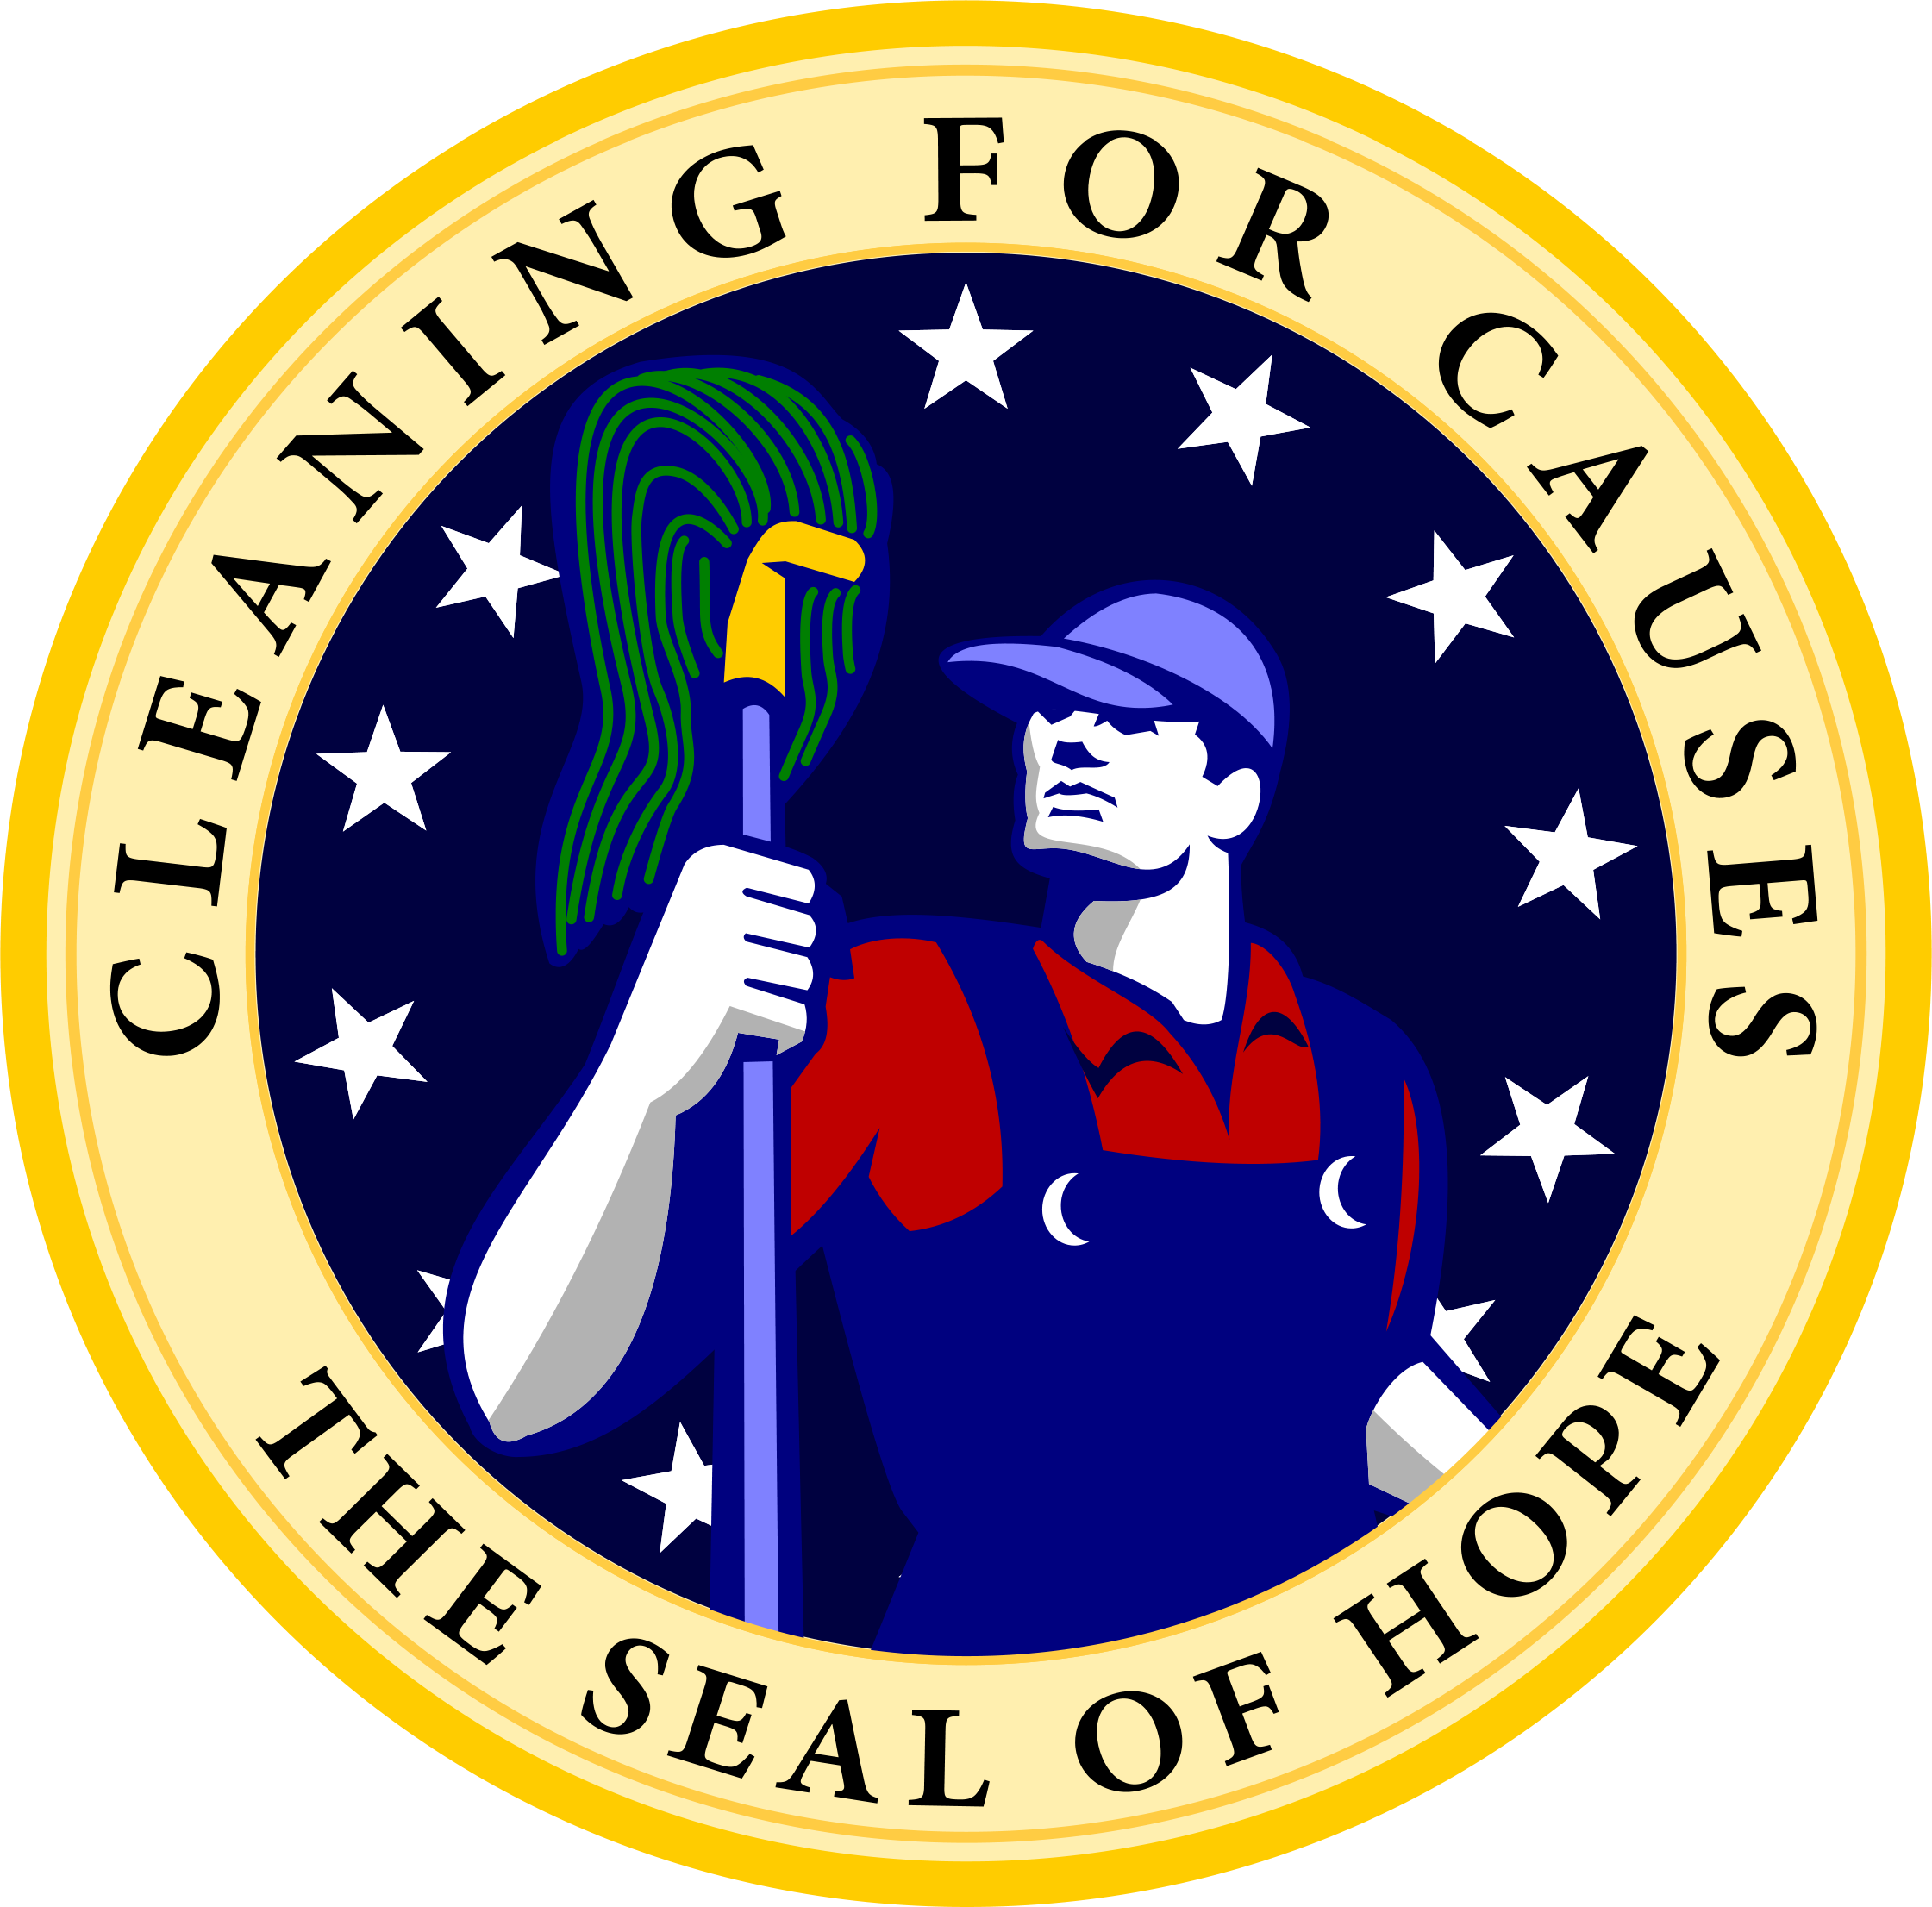 Cleaning For Causes A Complete Building Maintenance - Us Air Force Blanket (2241x2212)